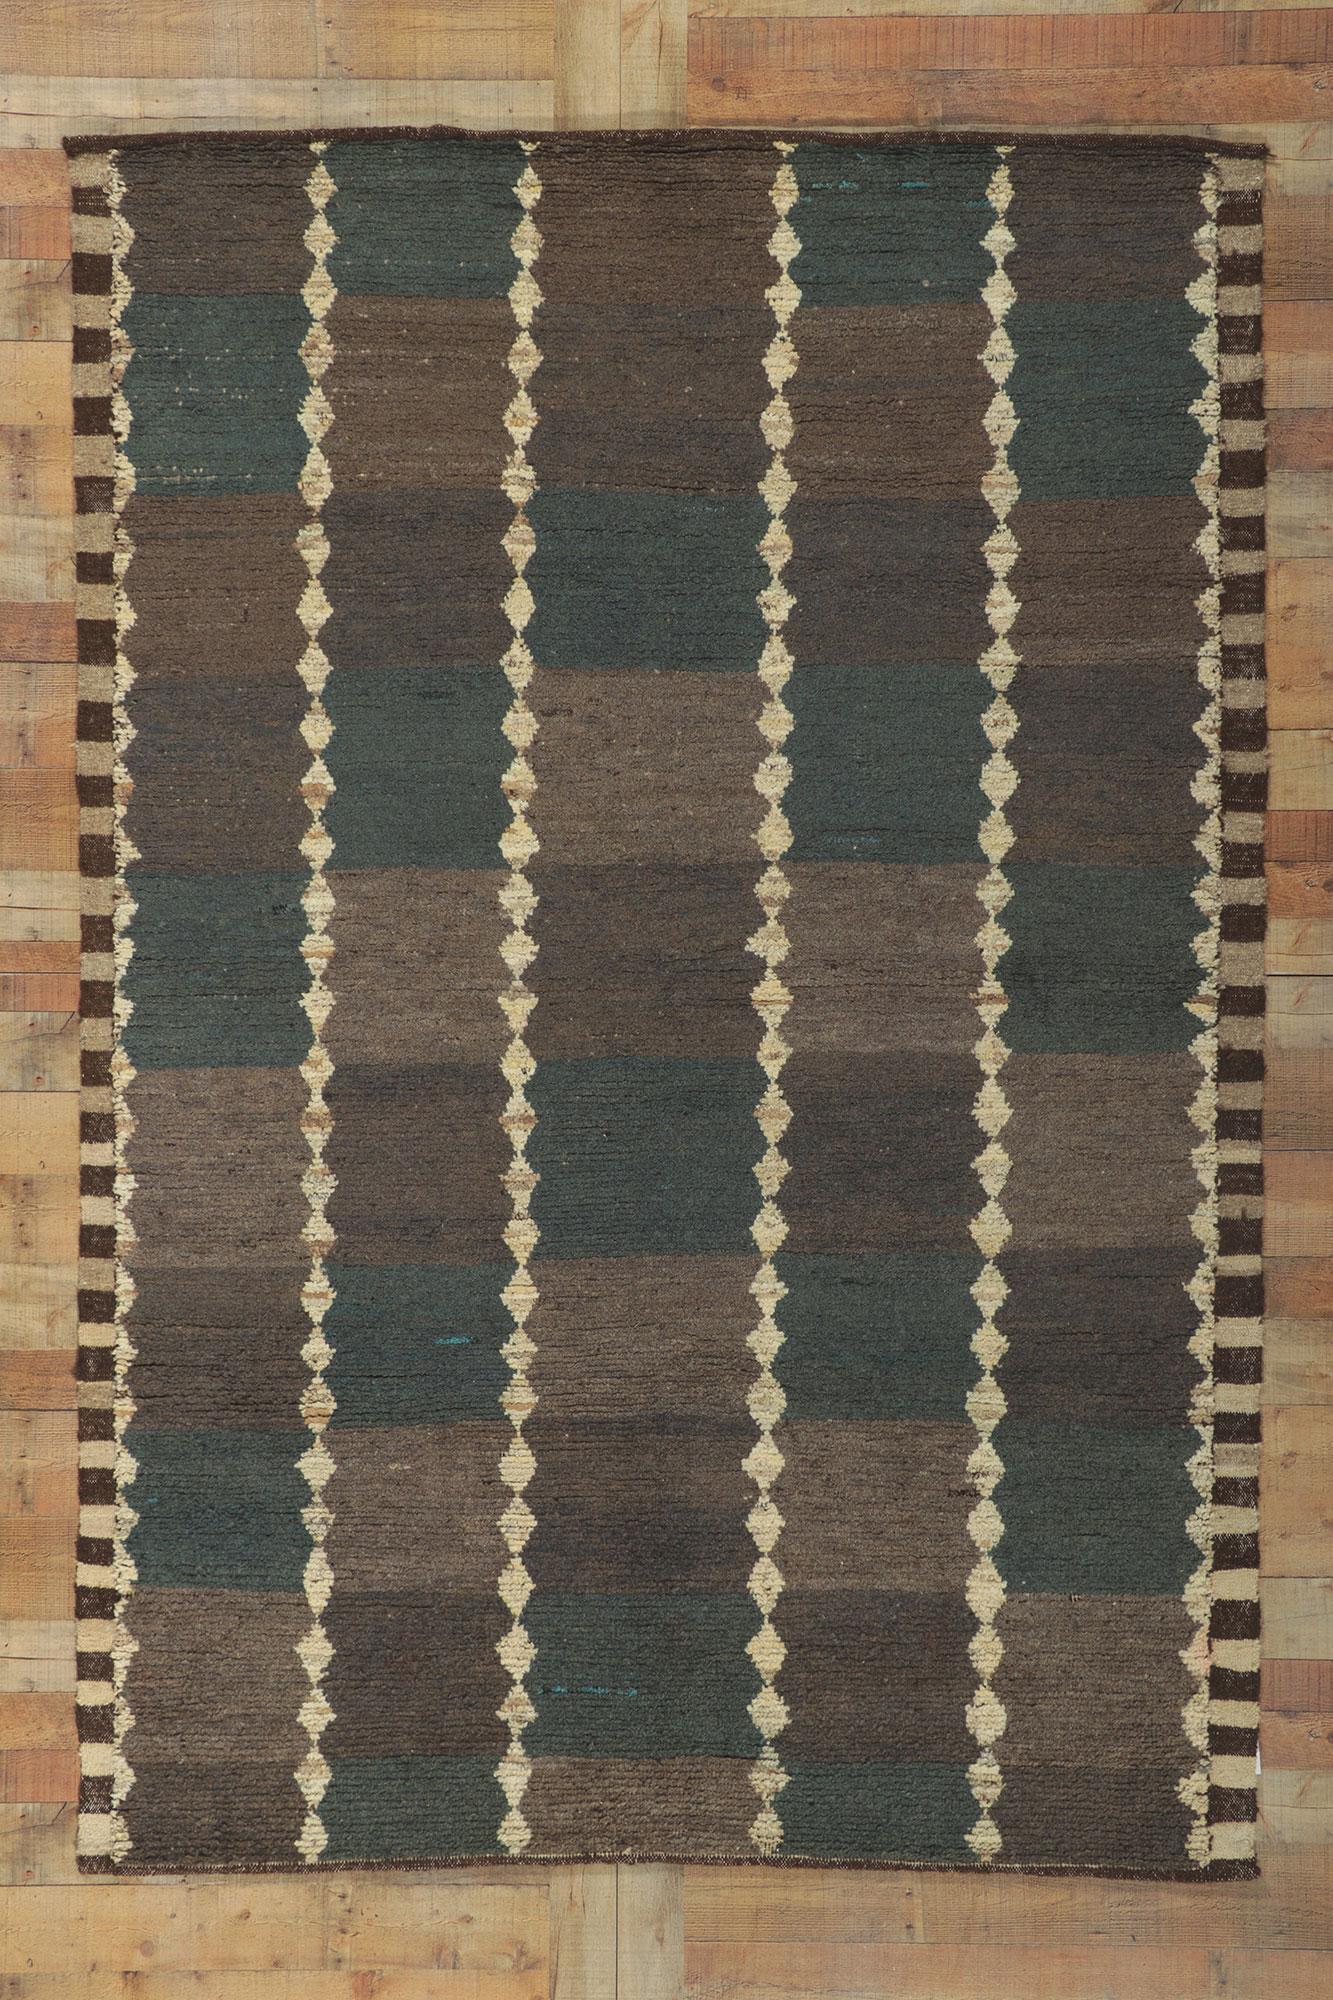 Earth-tone Checkered Moroccan Rug, Masculine Appeal Meets Midcentury Modern For Sale 1